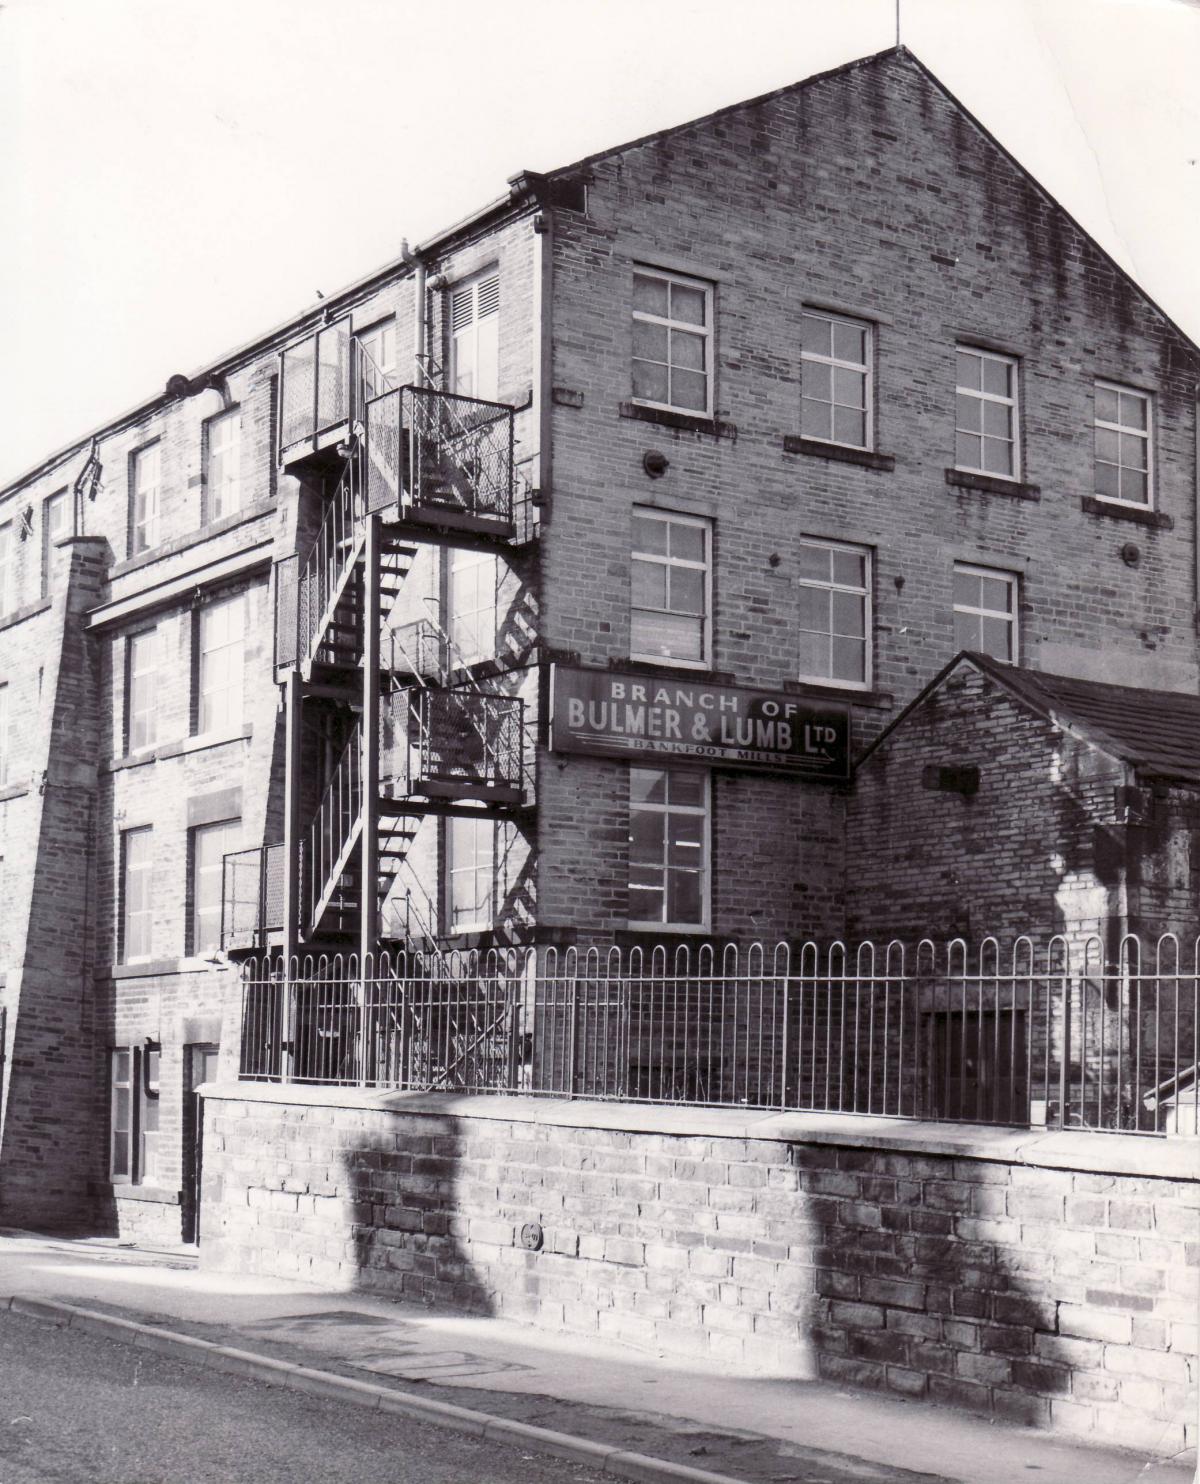 Bankfoot Mills shown in February 1971